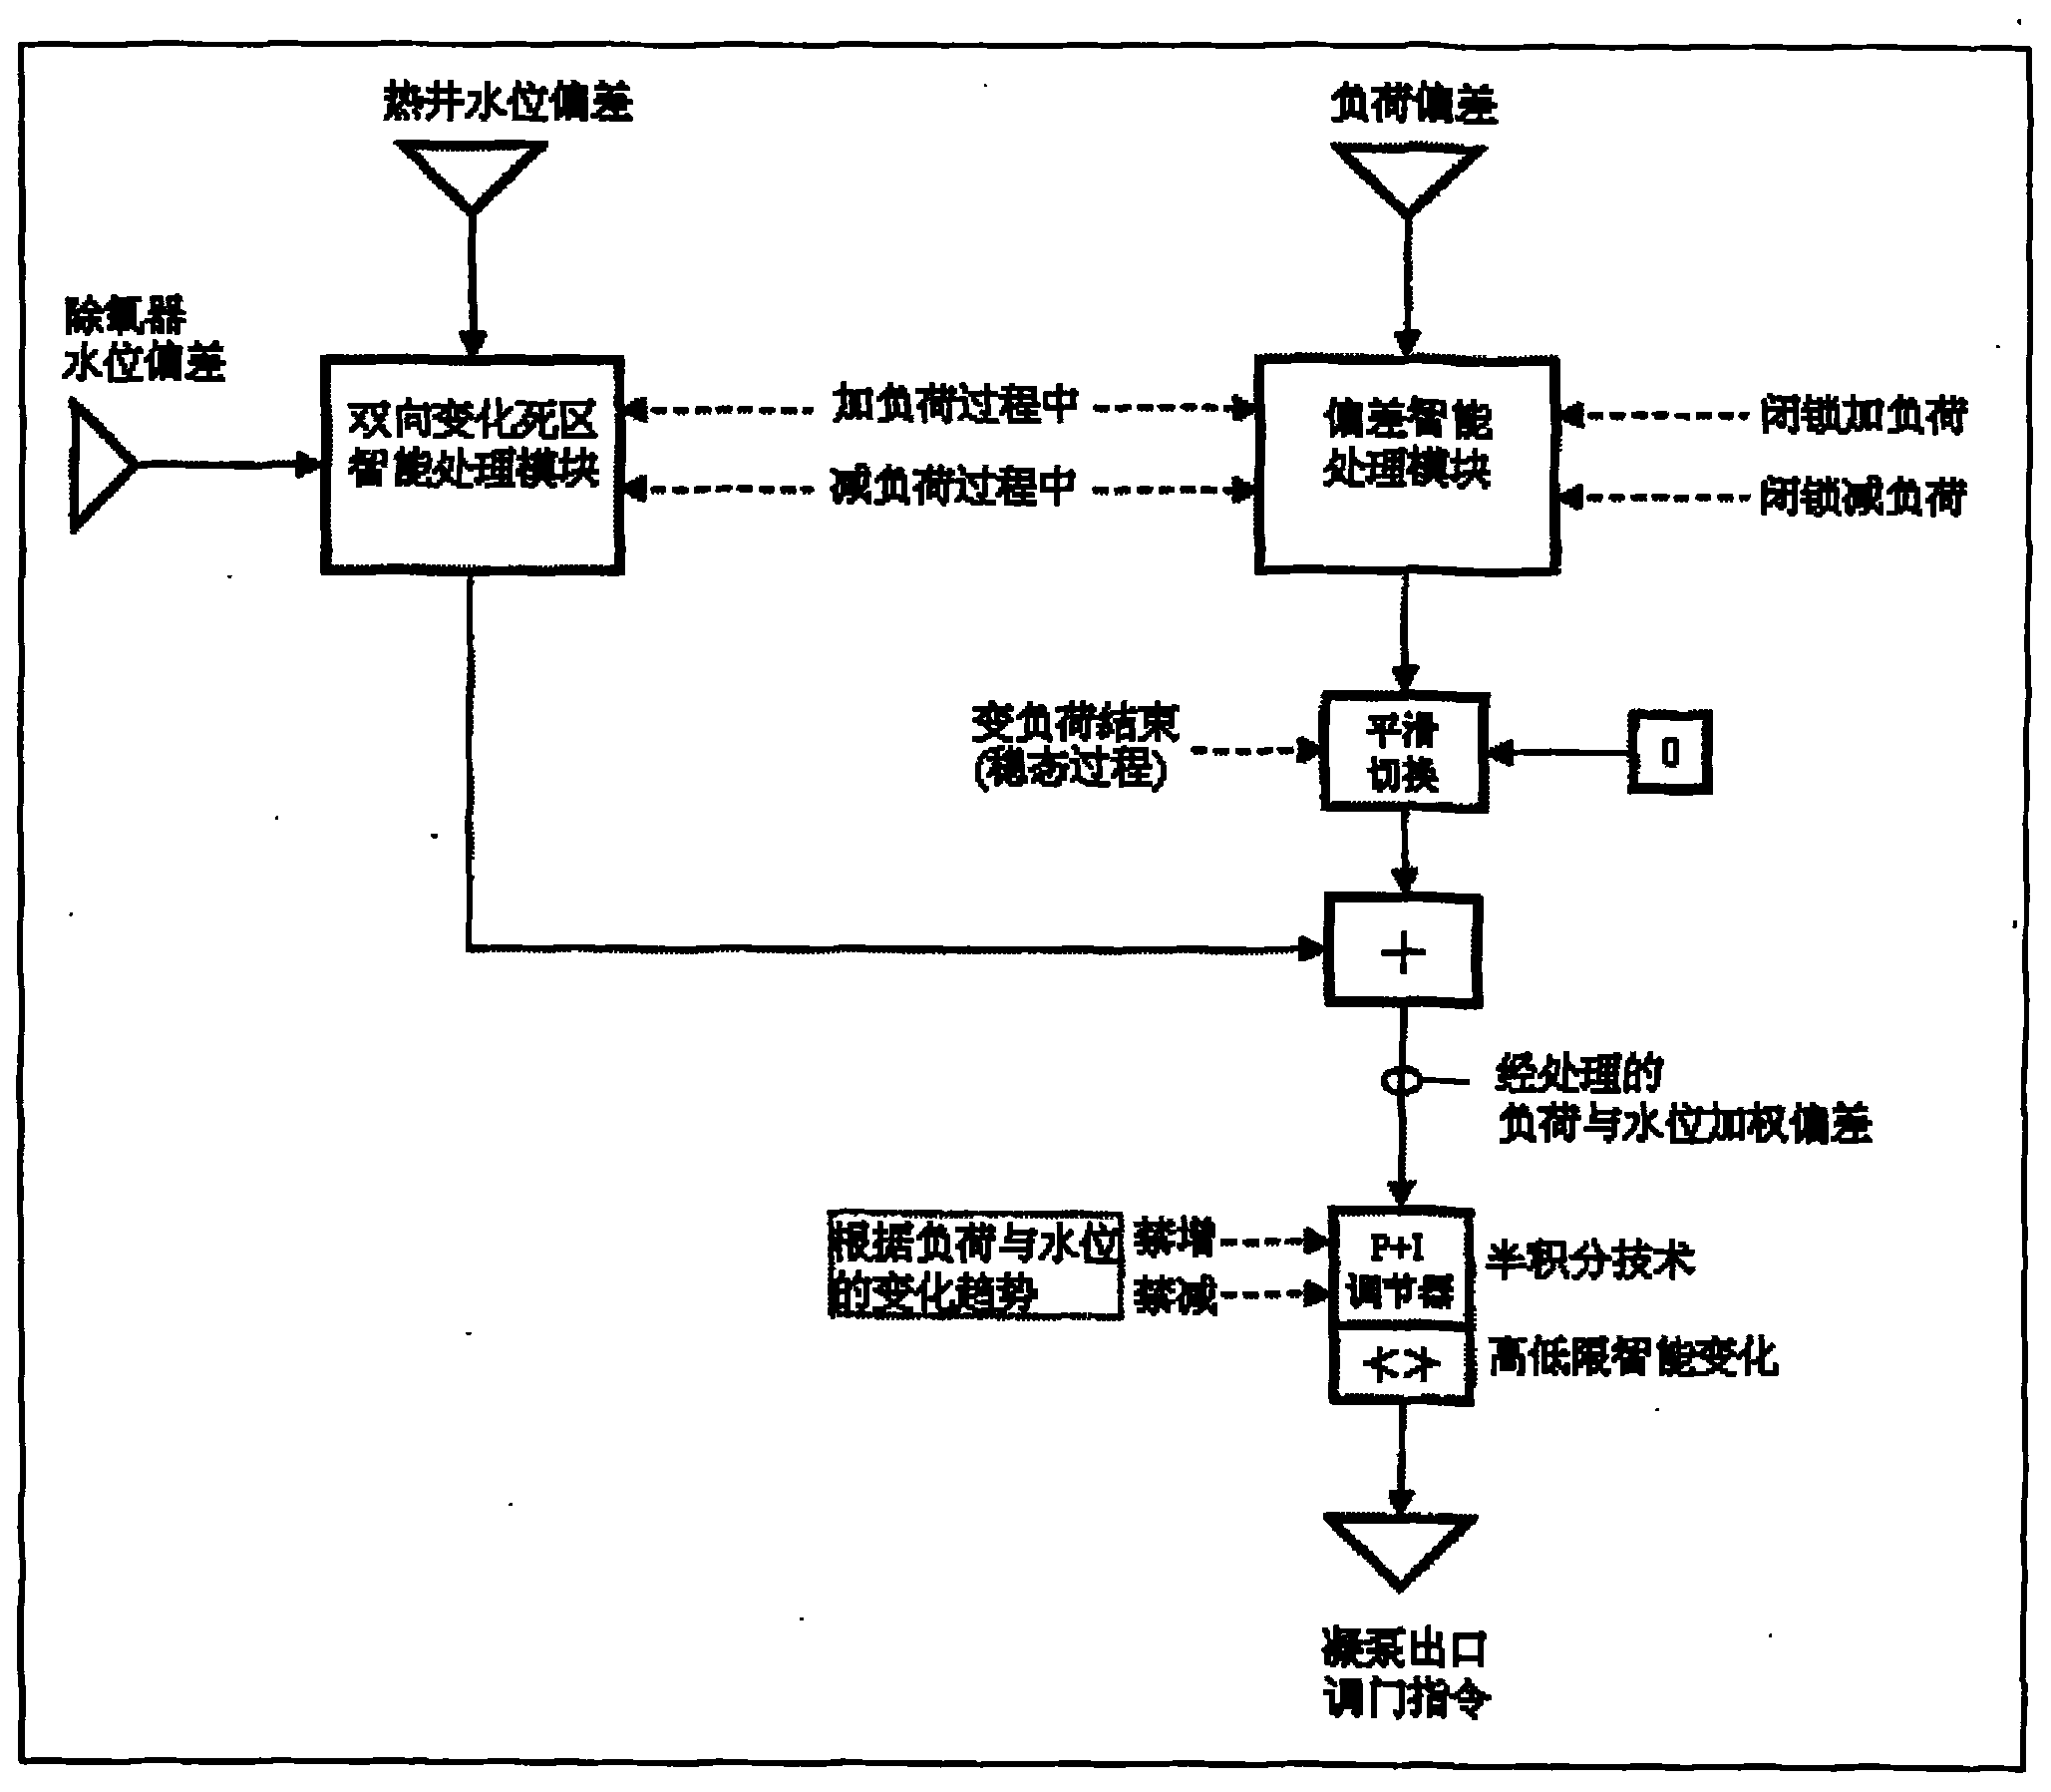 Thermal power unit cooperative load change control method